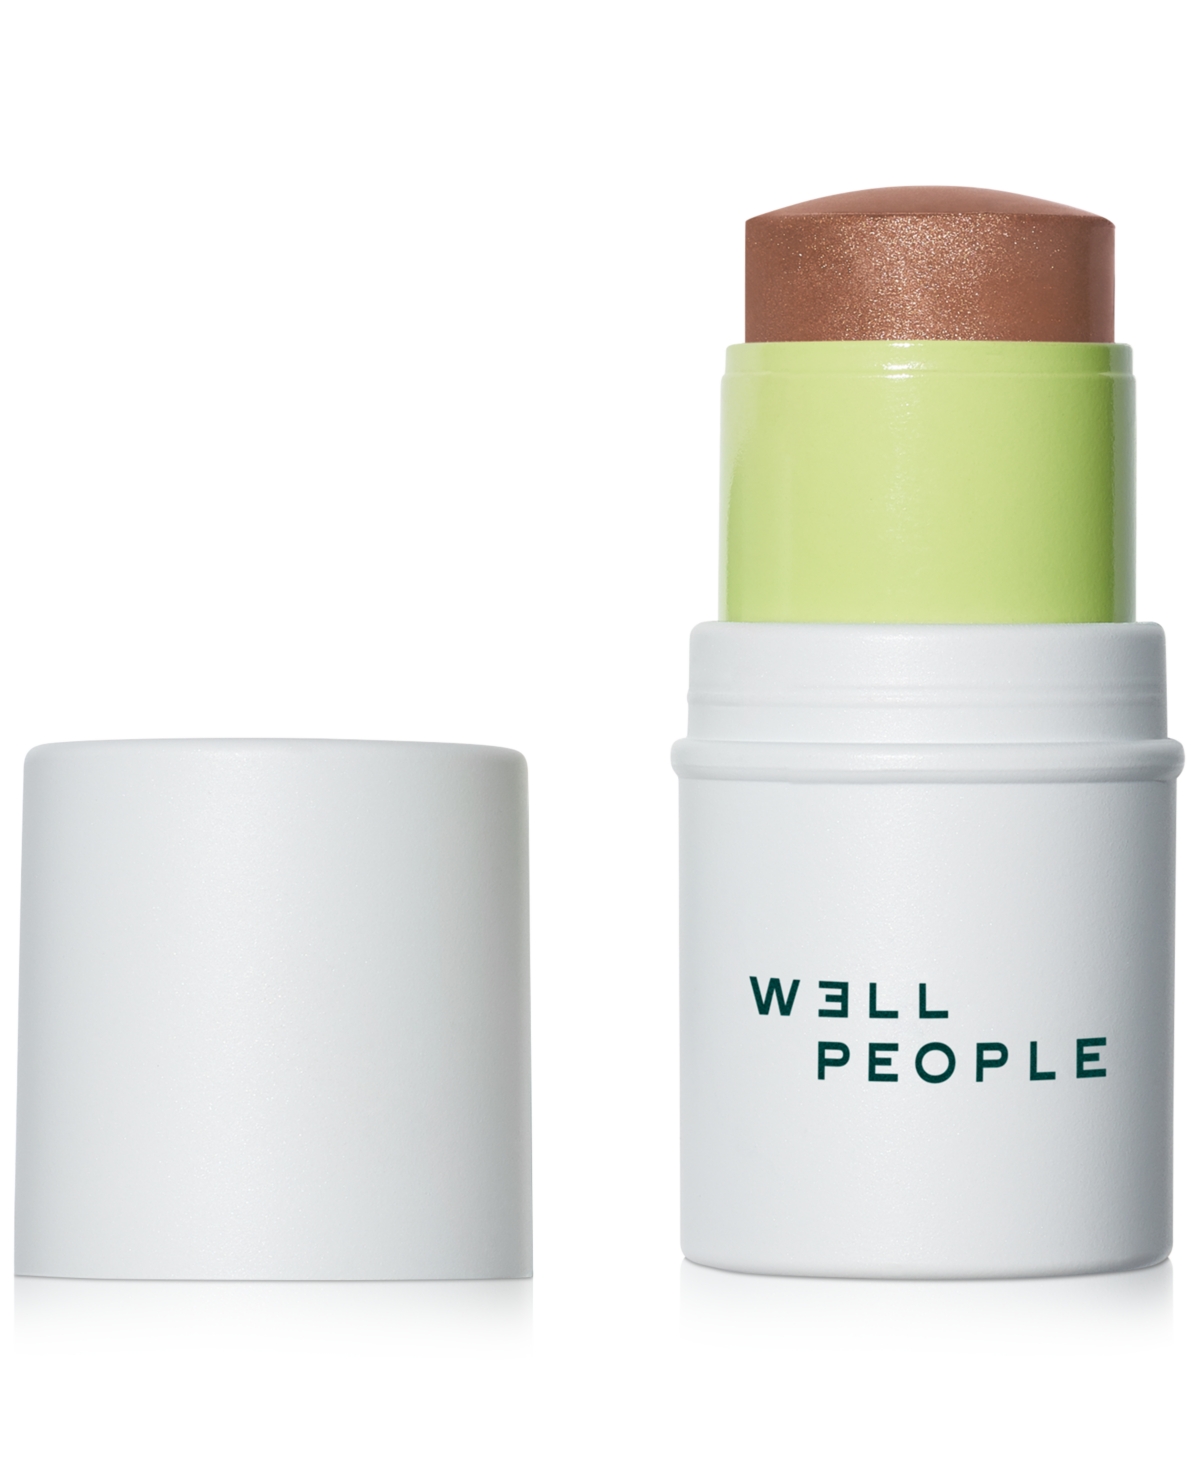 Well People Supernatural Stick Bronzer In Neutral Tan